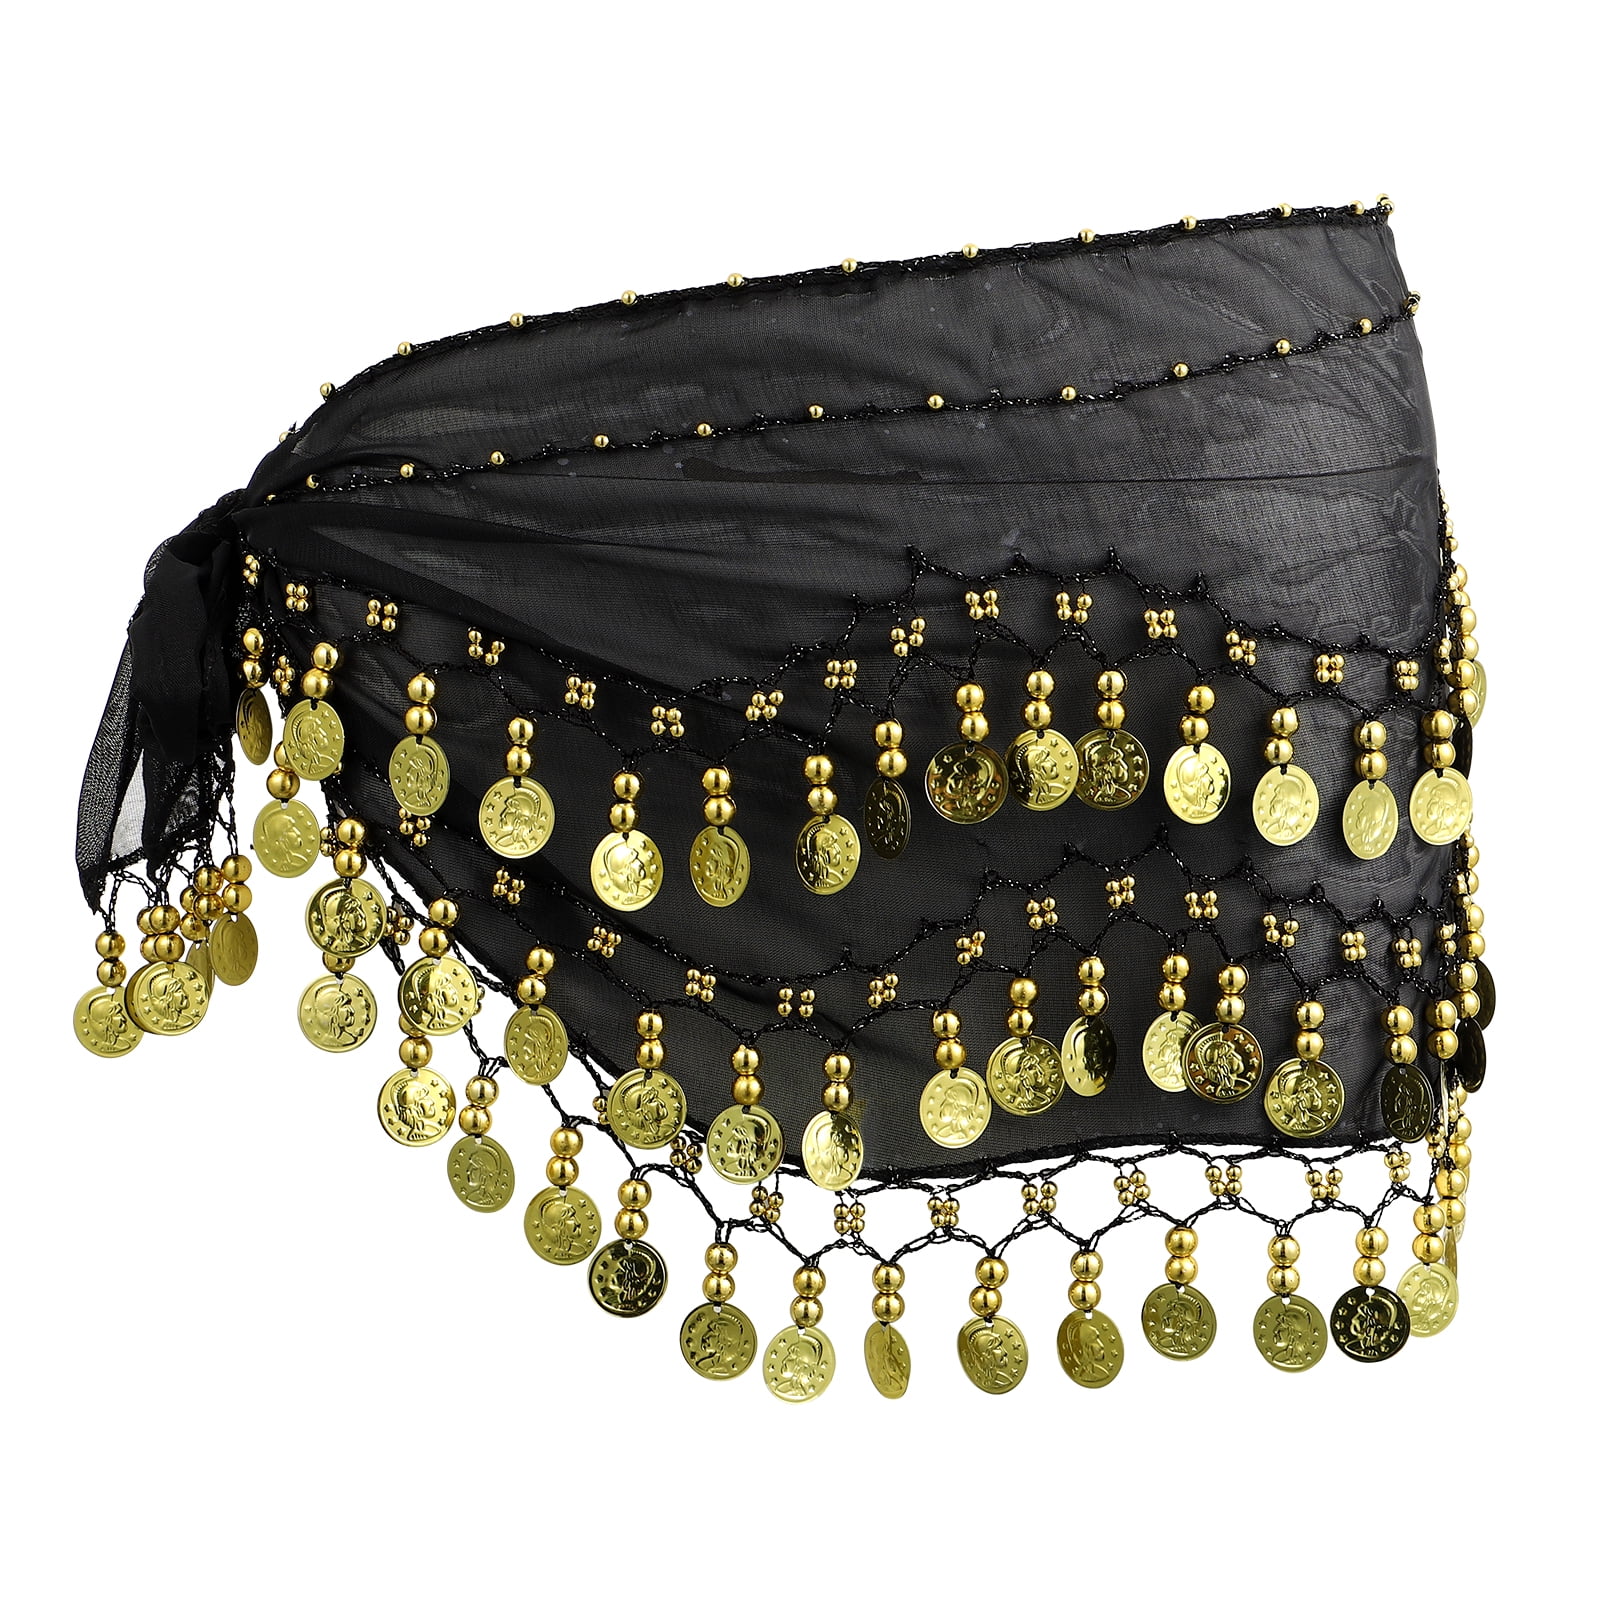 Belly Dance Skirt Hip Scarf Dancing Pirate Dancer Costume Chain